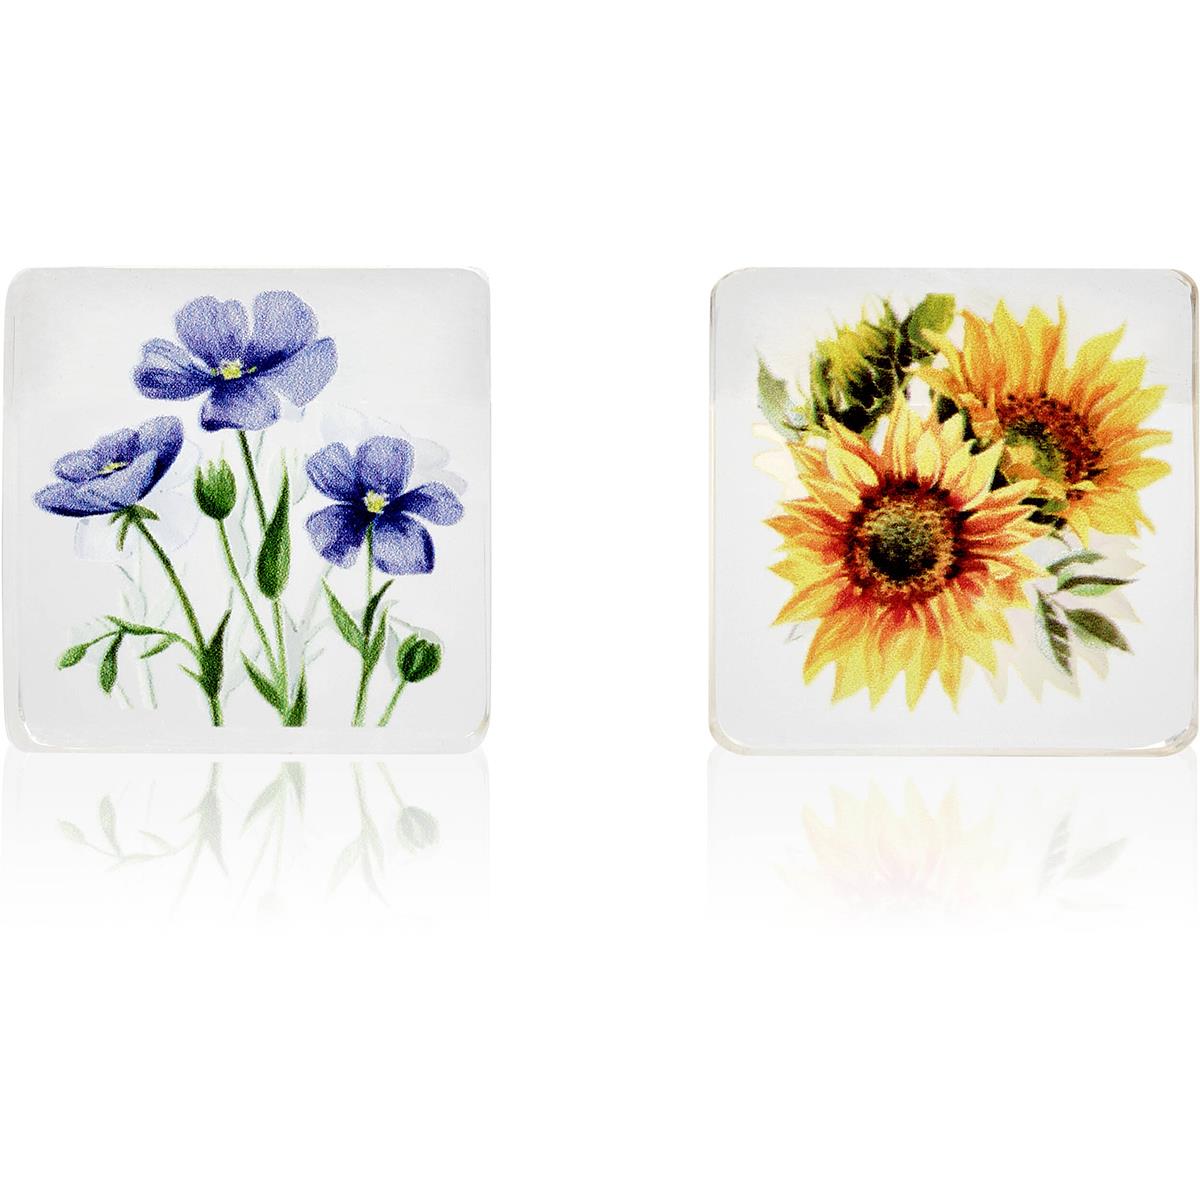 Image of Fujifilm Instax Acrylic Floral Cube Photo Stands